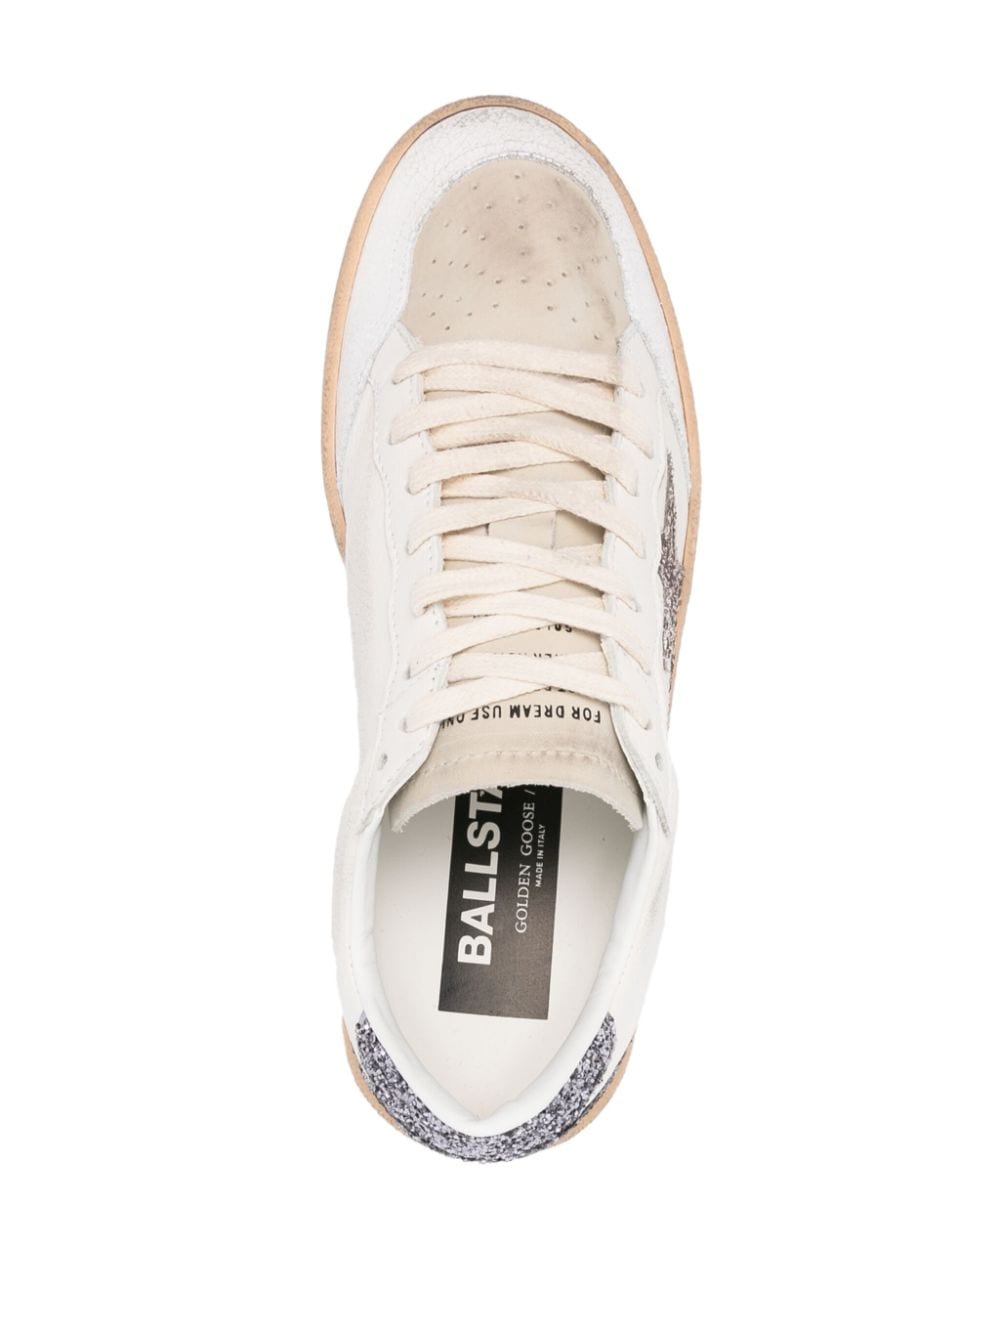 Shop Golden Goose Ball Star Glittered Leather Sneakers In White